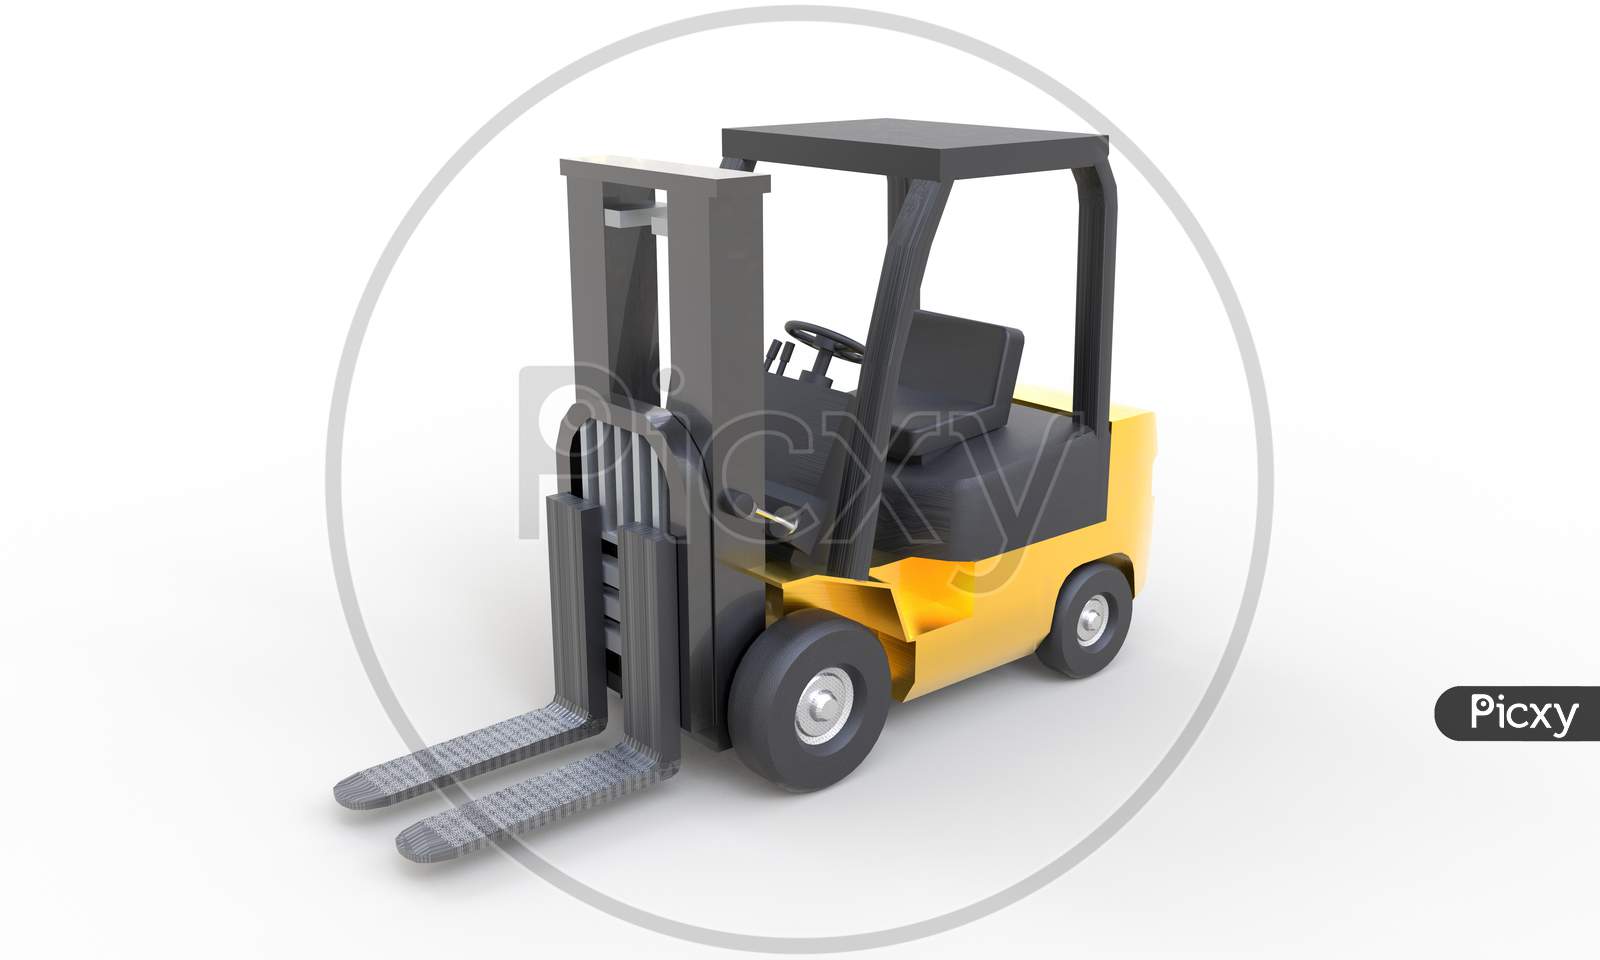 Yellow Forklift With Empty Fork Parking On White Background. Transportation And Industrial Concept. Shipment And Delivery Storage. 3D Illustration Rendering